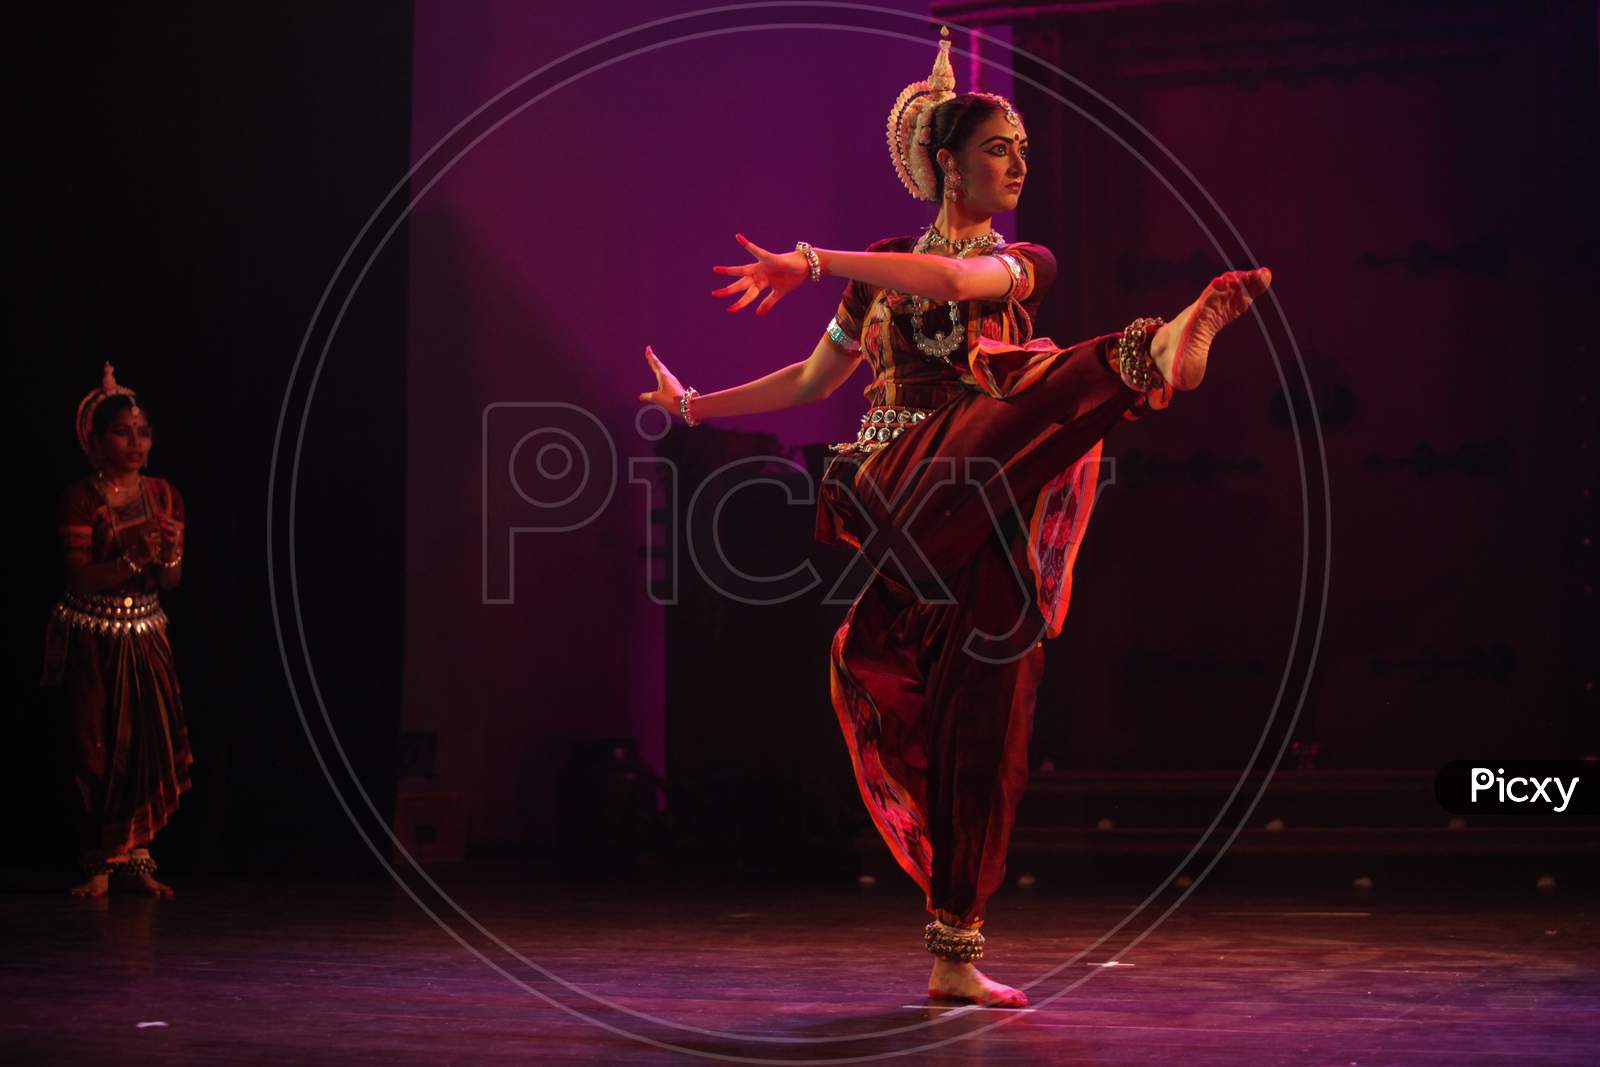 A young odissi dancer shows the beauty on December 14,2019 at Sevasadan hall,Bengaluru India